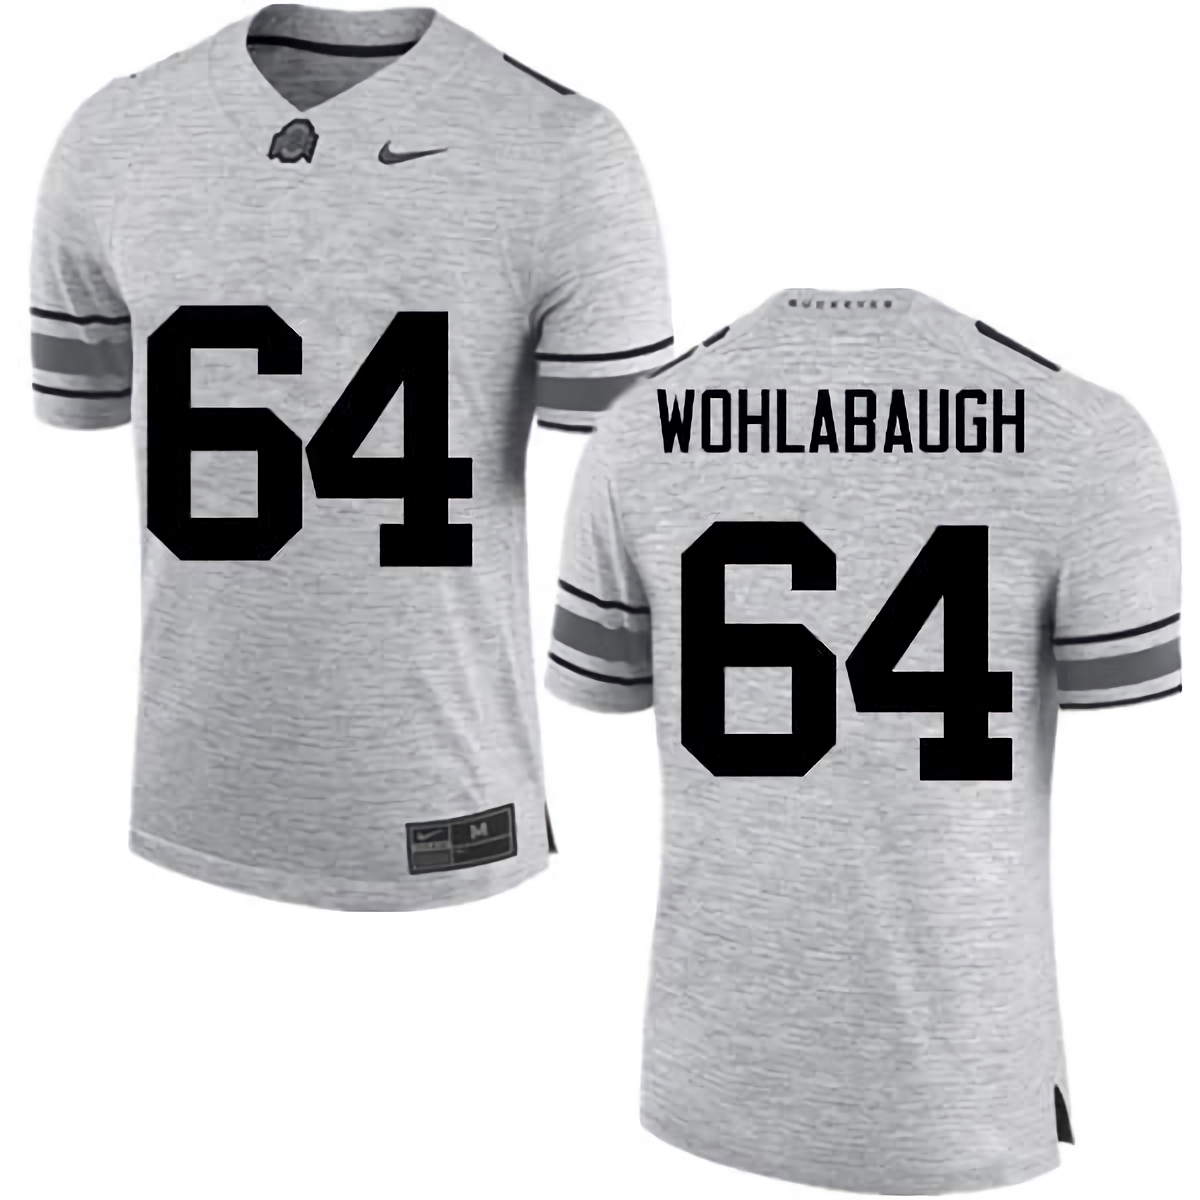 Jack Wohlabaugh Ohio State Buckeyes Men's NCAA #64 Nike Gray College Stitched Football Jersey OZV0656JT